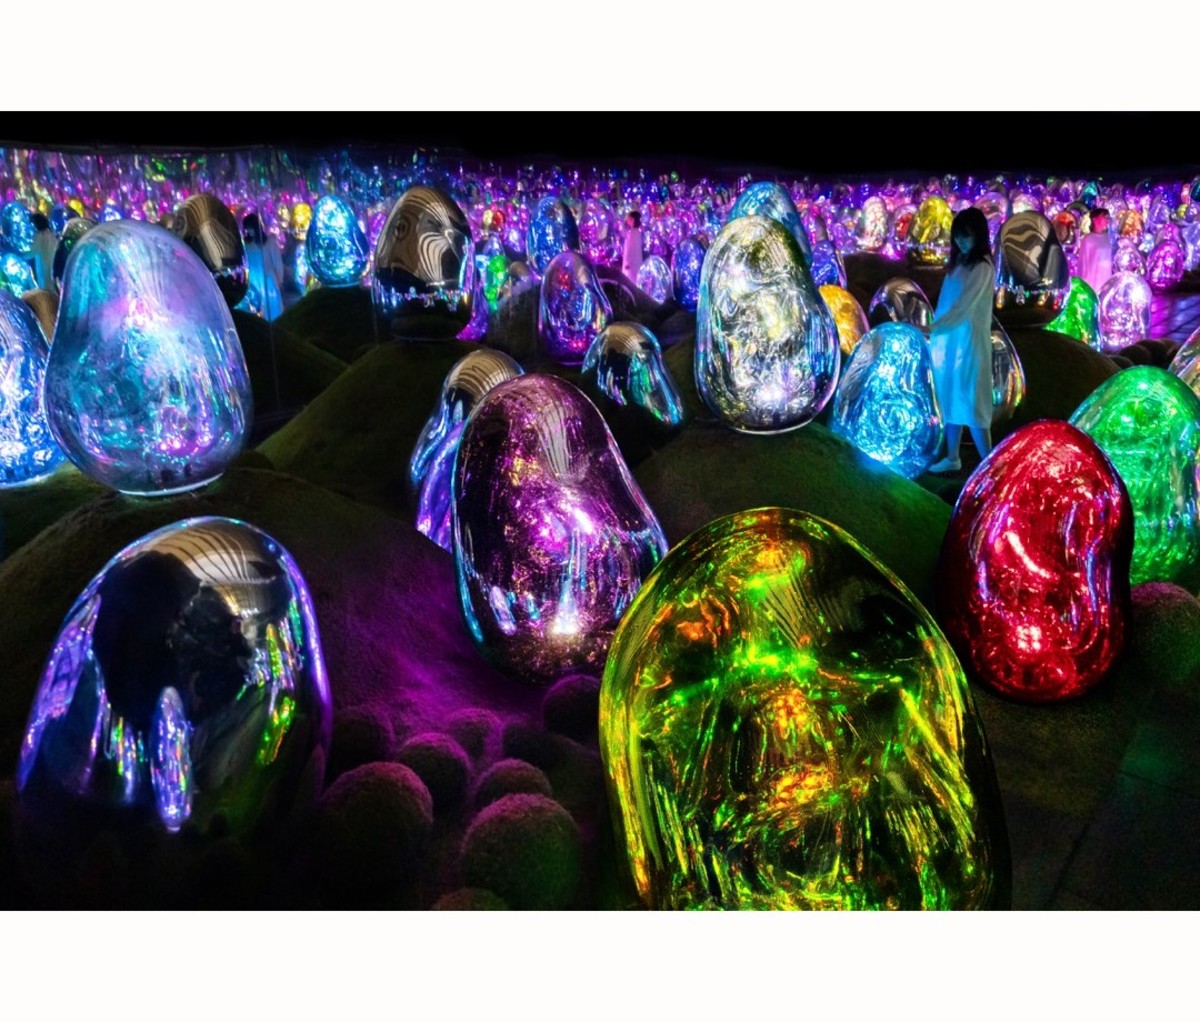 Colorful sculptures glowing at night